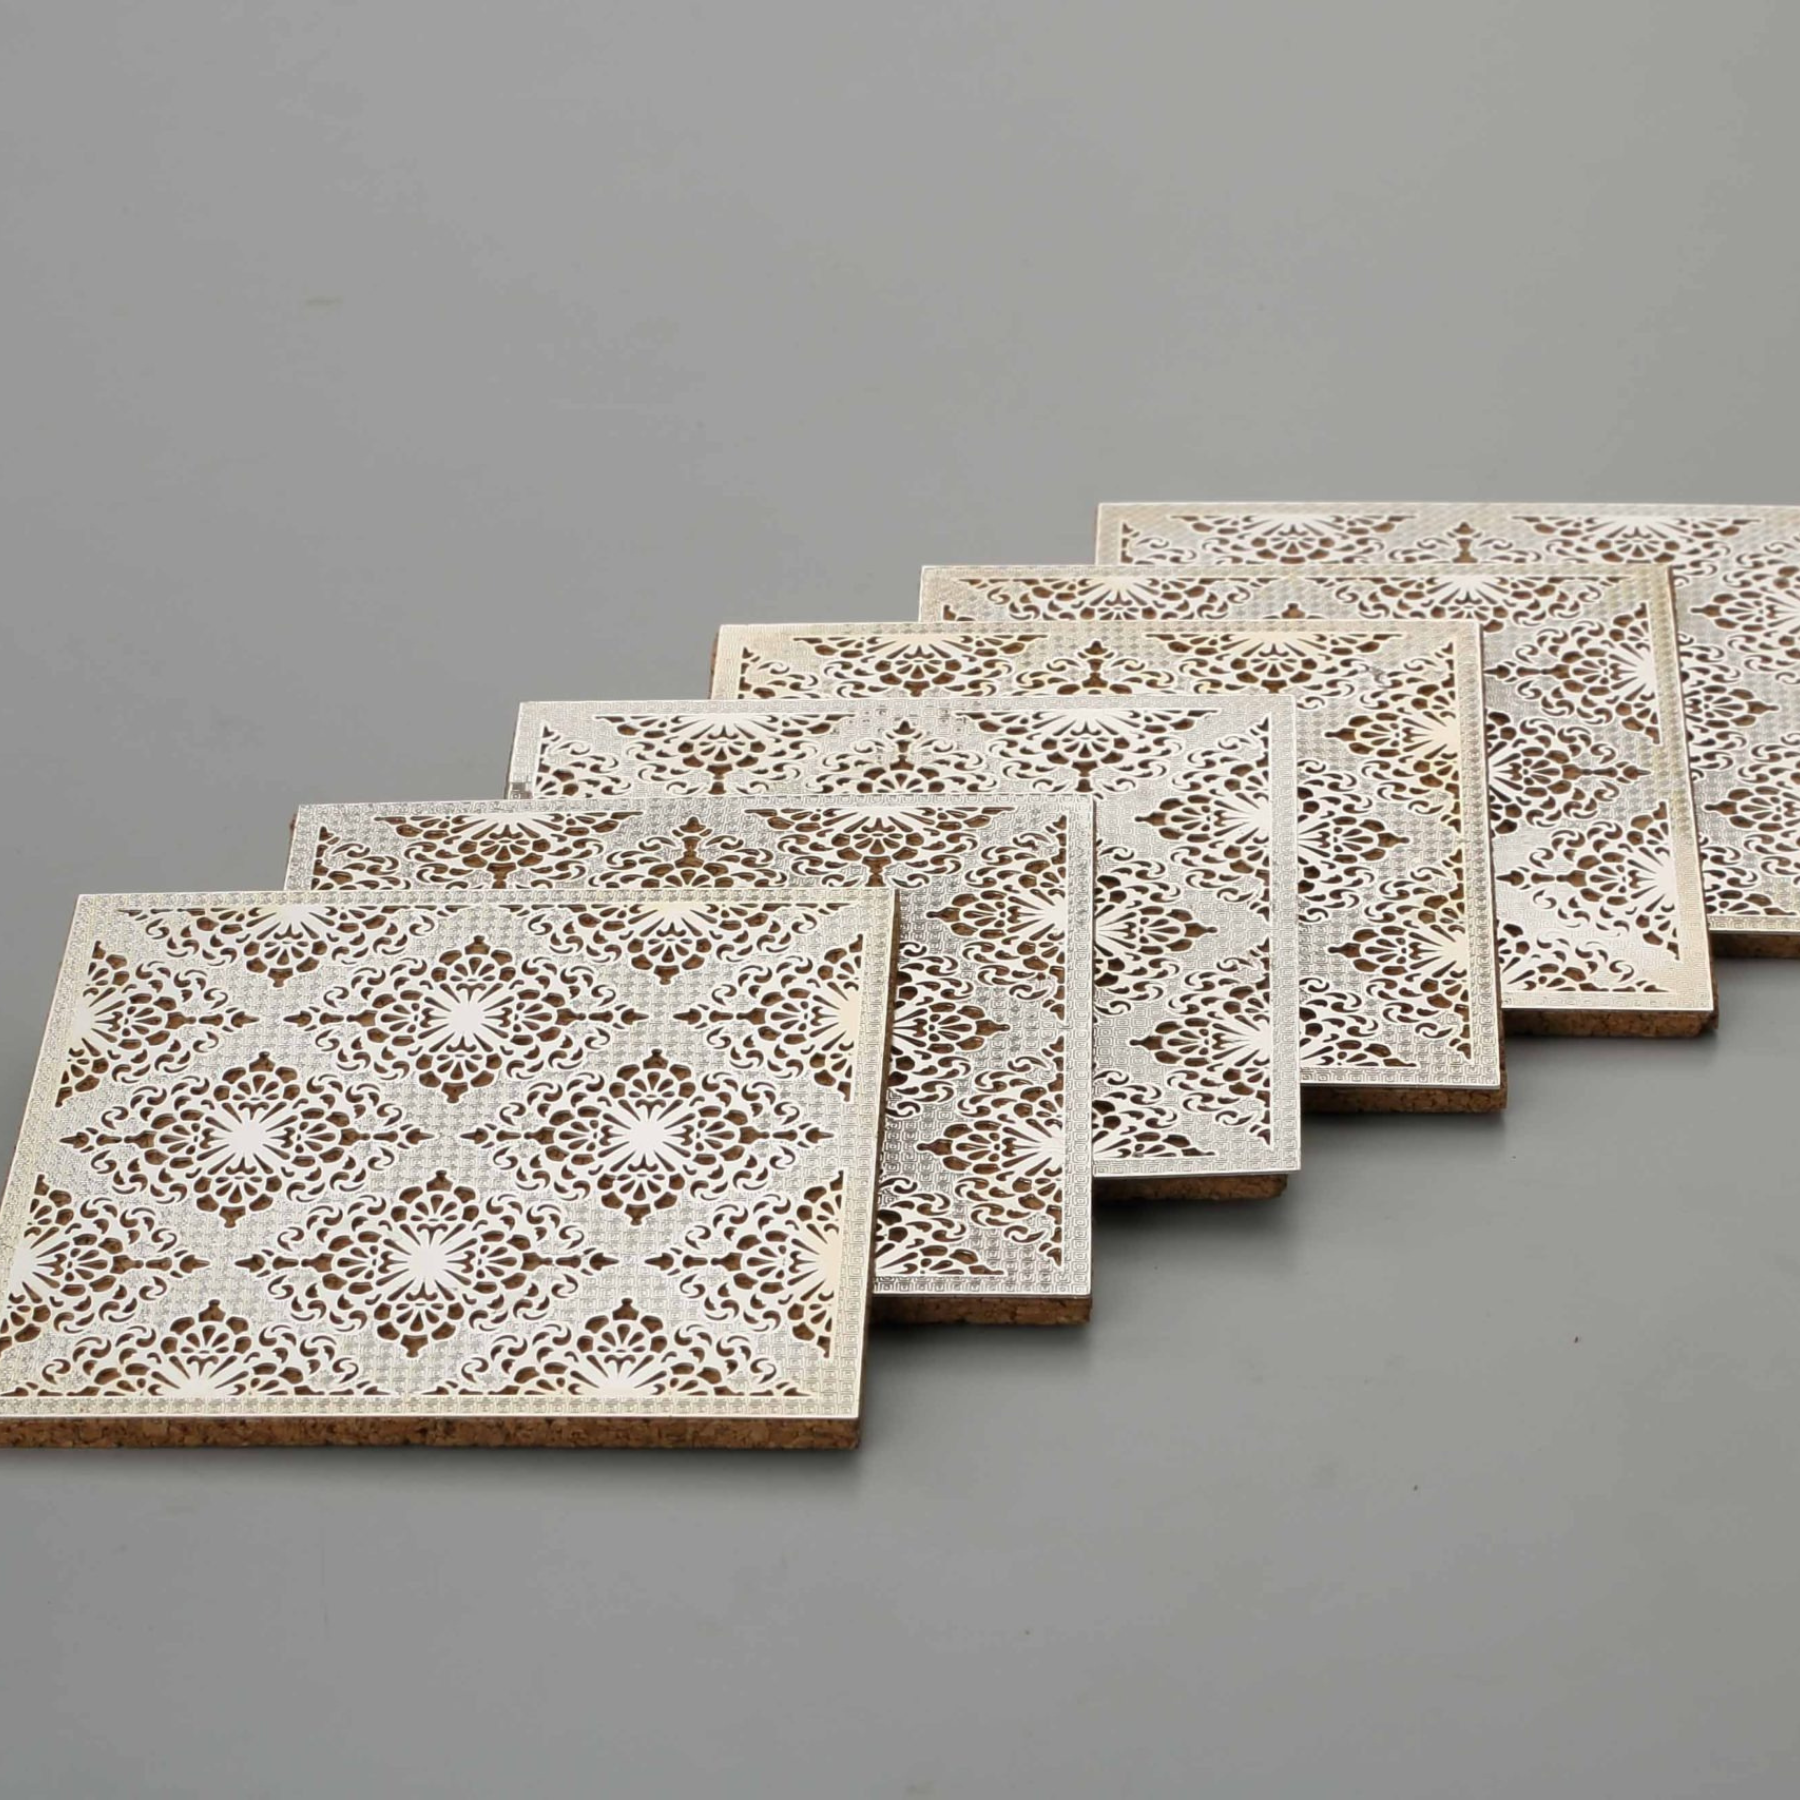 Silver Plated Cutwork Coasters on Cork Sheet Set of 6